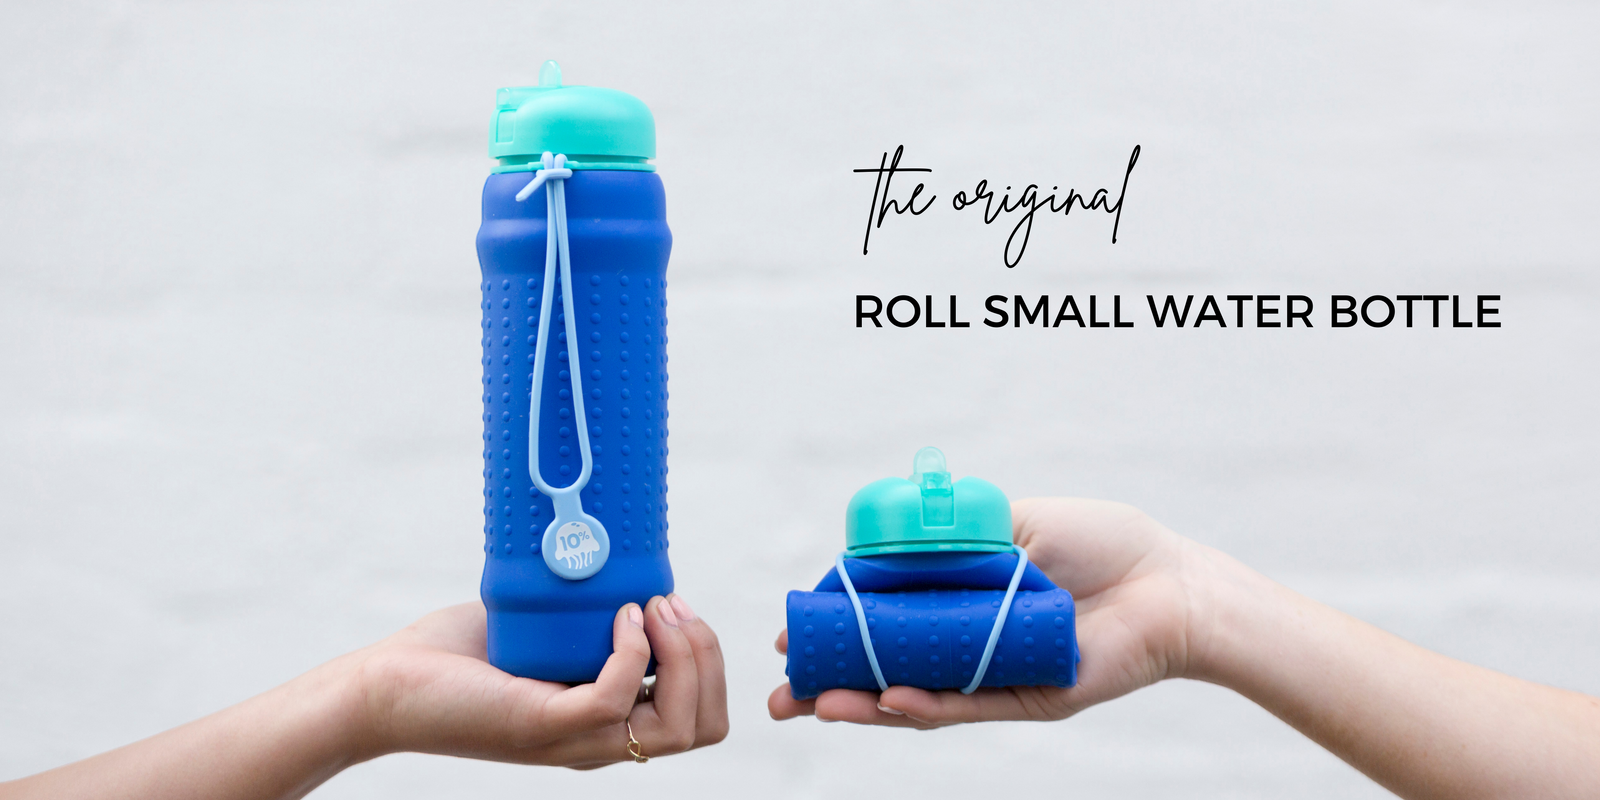 The roll small, collapsible and portable reusable water bottle.